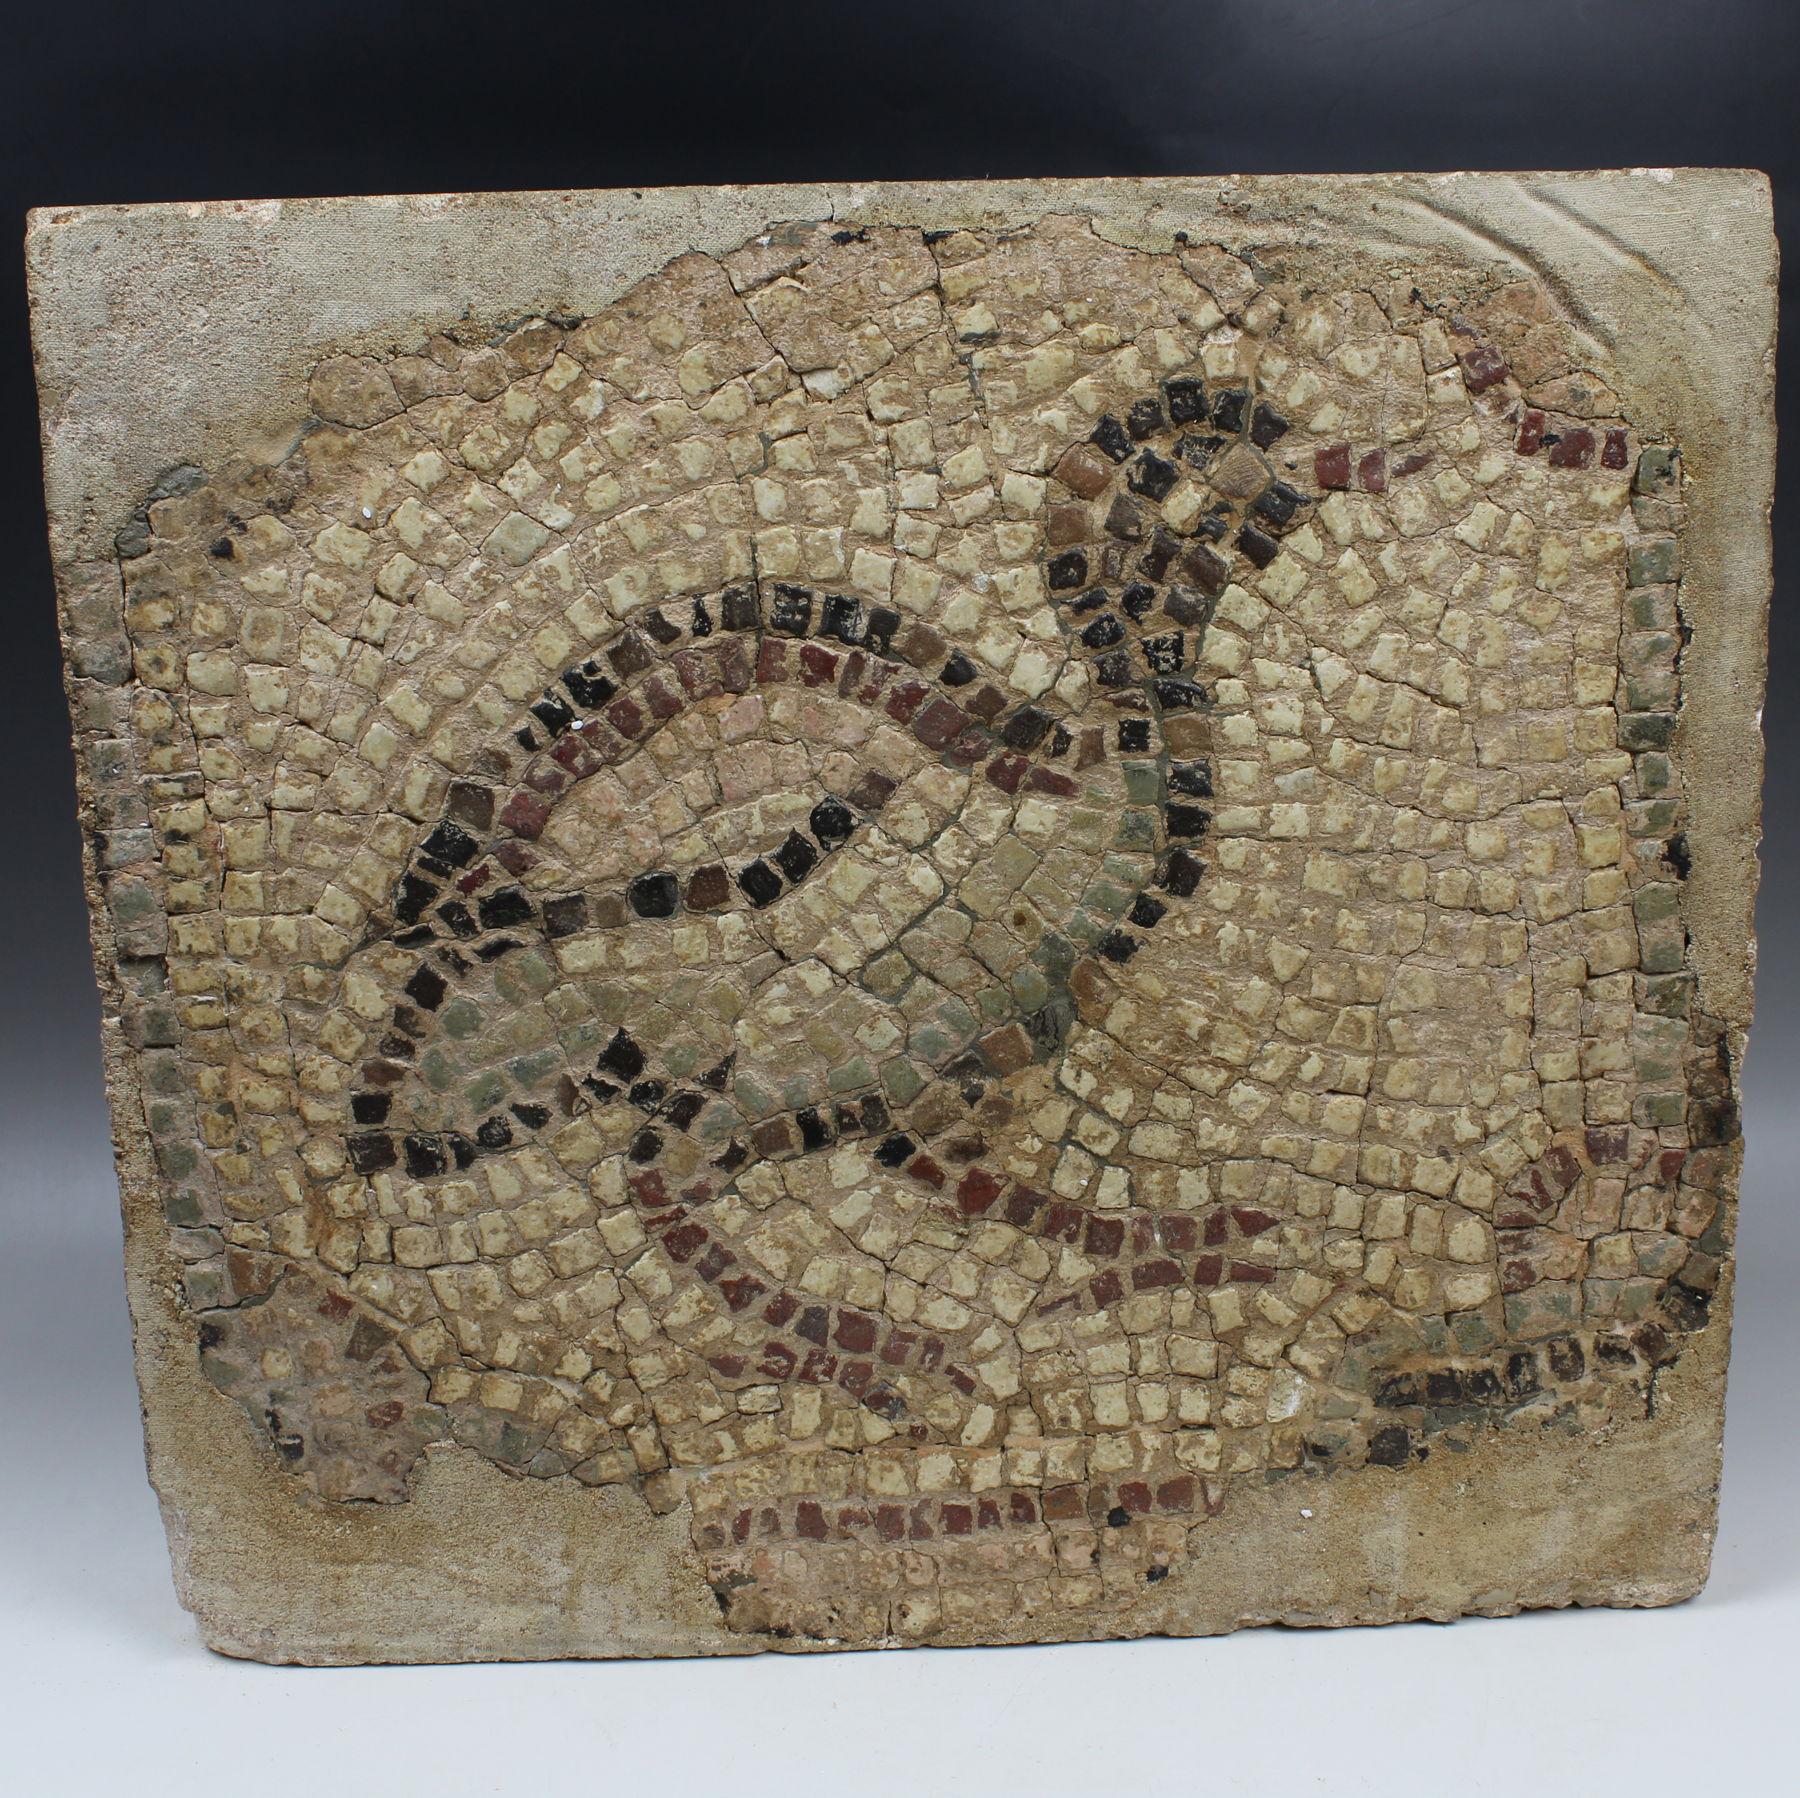 ITEM: Mosaic depicting a bird
MATERIAL: Tesserae
CULTURE: Roman
PERIOD: 3rd Century A.D
DIMENSIONS: 400 mm x 440 mm x 40 mm
CONDITION: Good condition
PROVENANCE: Ex Swiss private collection, E.O., Geneve, acquired before 1990s

Comes with